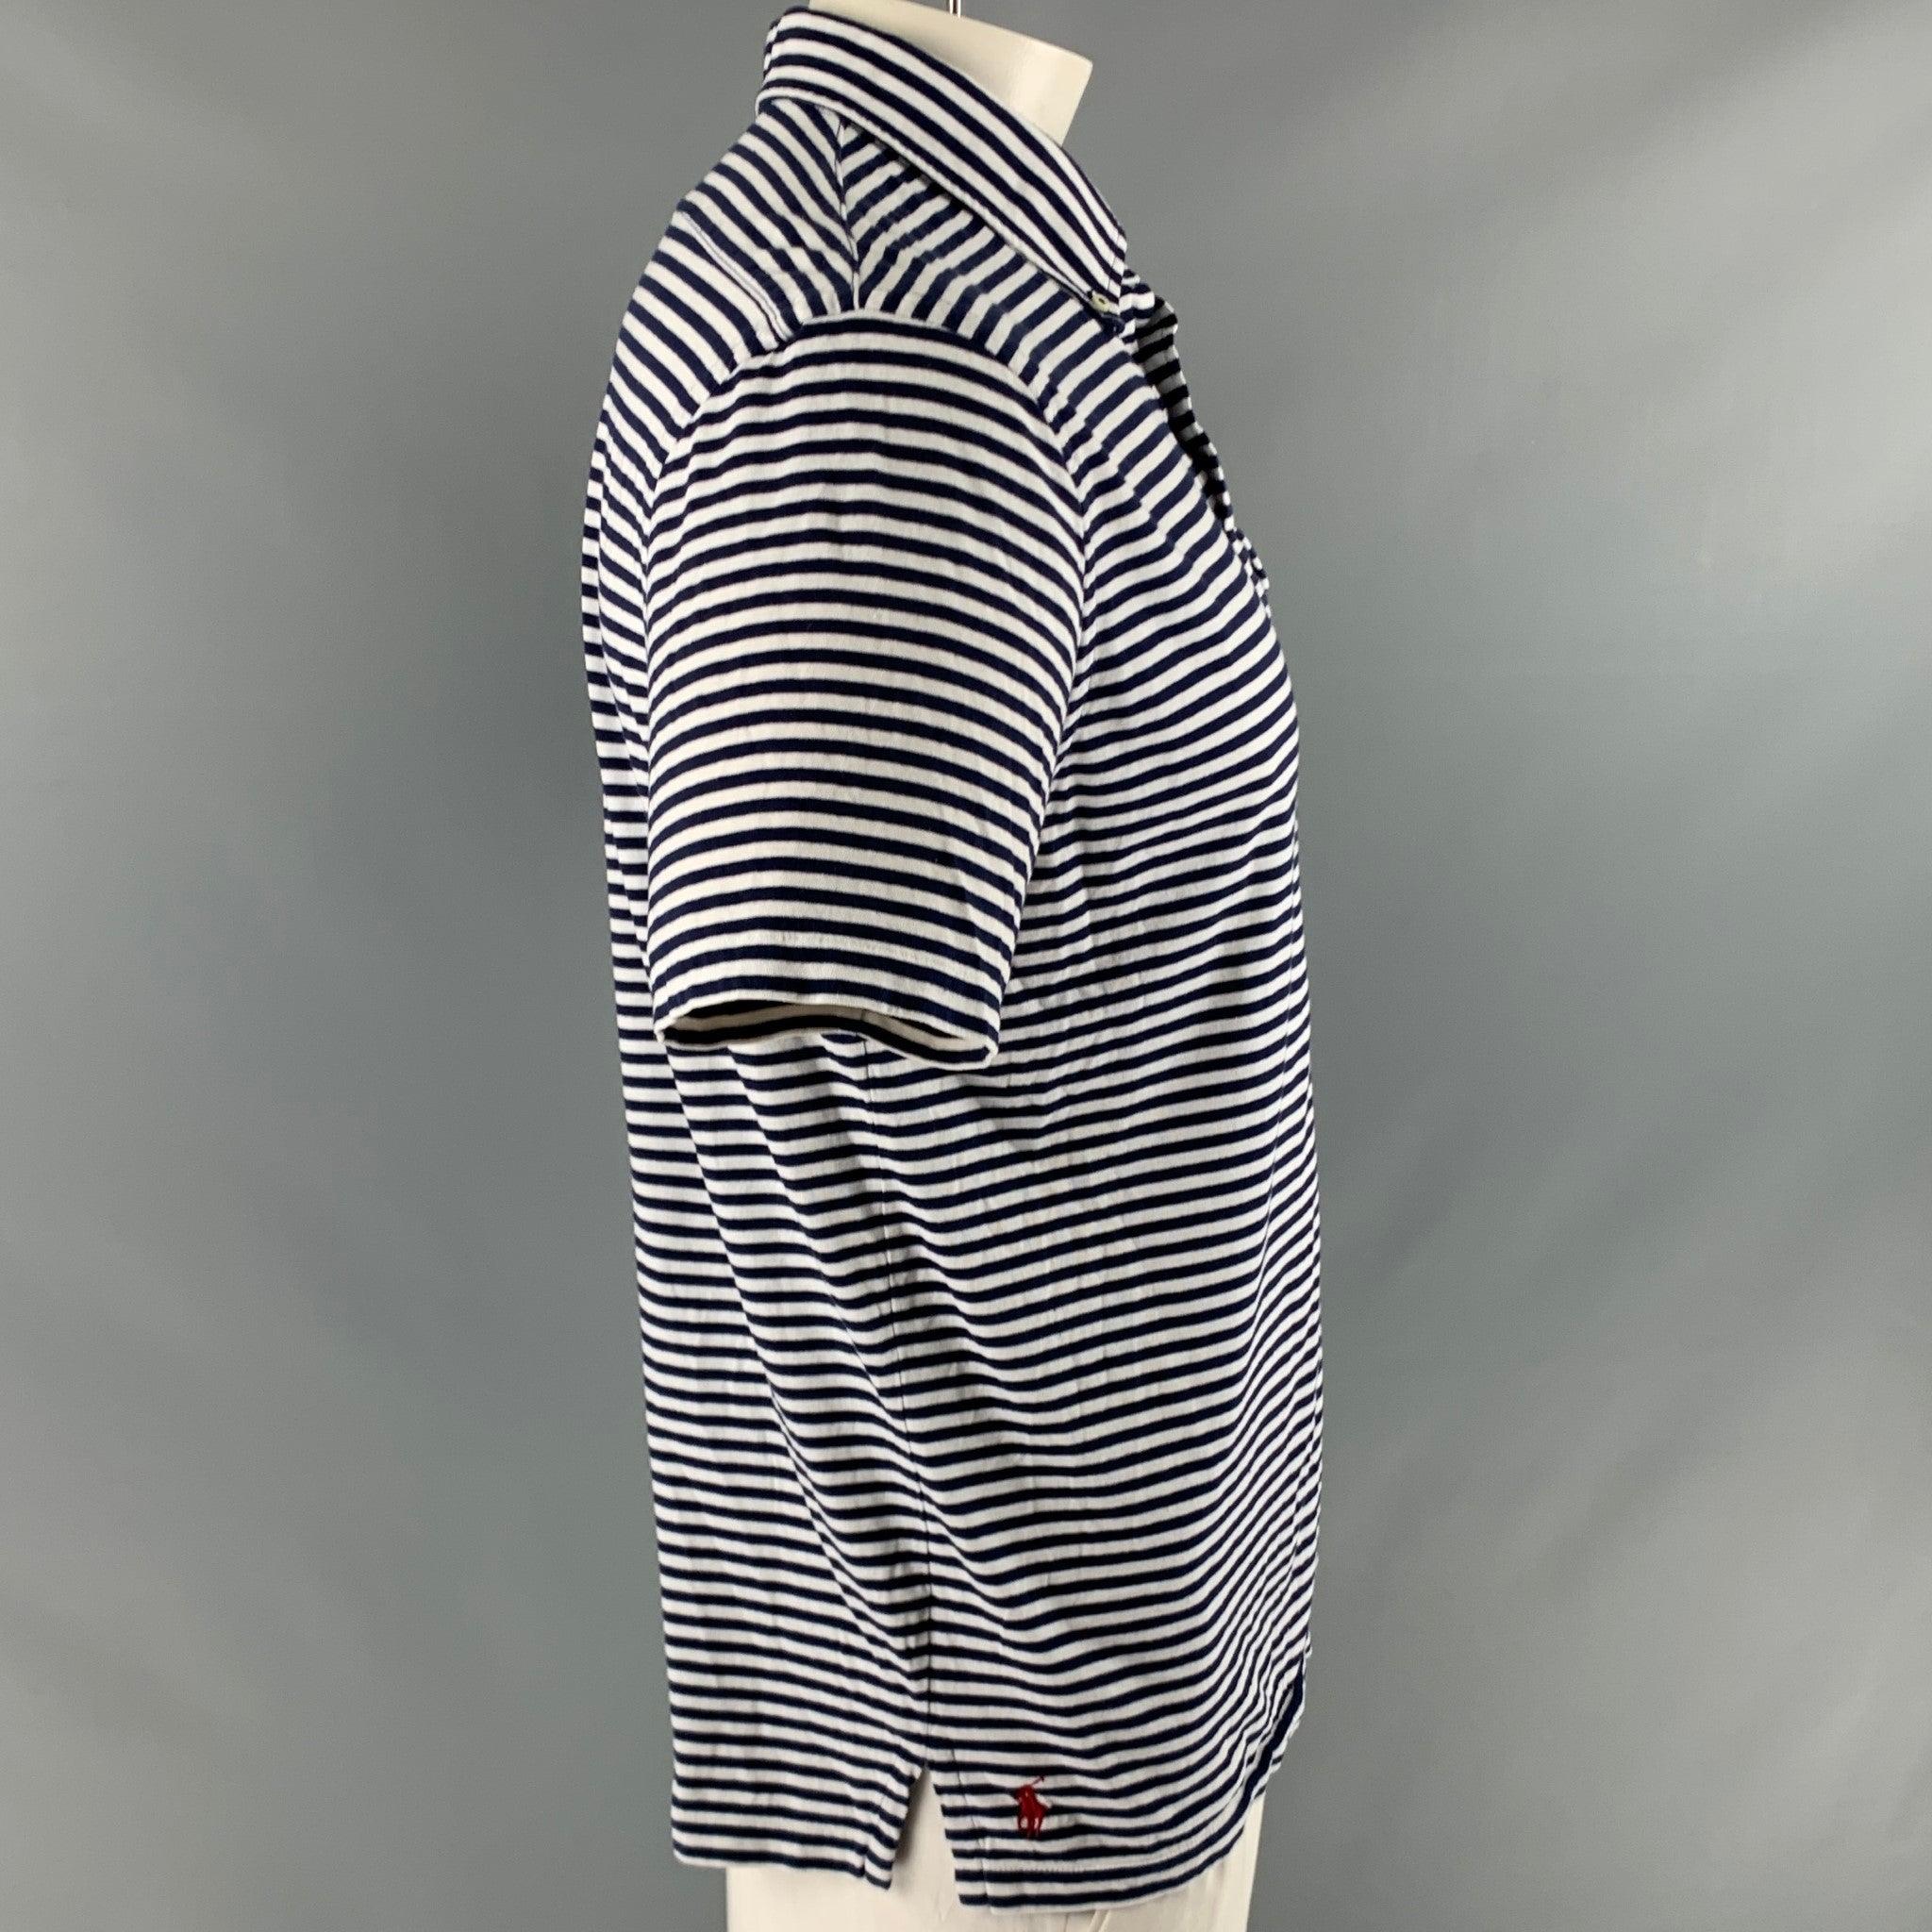 RALPH LAUREN polo
in a
navy and white cotton featuring horizontal stripe pattern, one pocket, button down collar, and half placket button closure.Very Good Pre-Owned Condition. Minor pilling. 

Marked:   XL 

Measurements: 
 
Shoulder: 18.5 inches